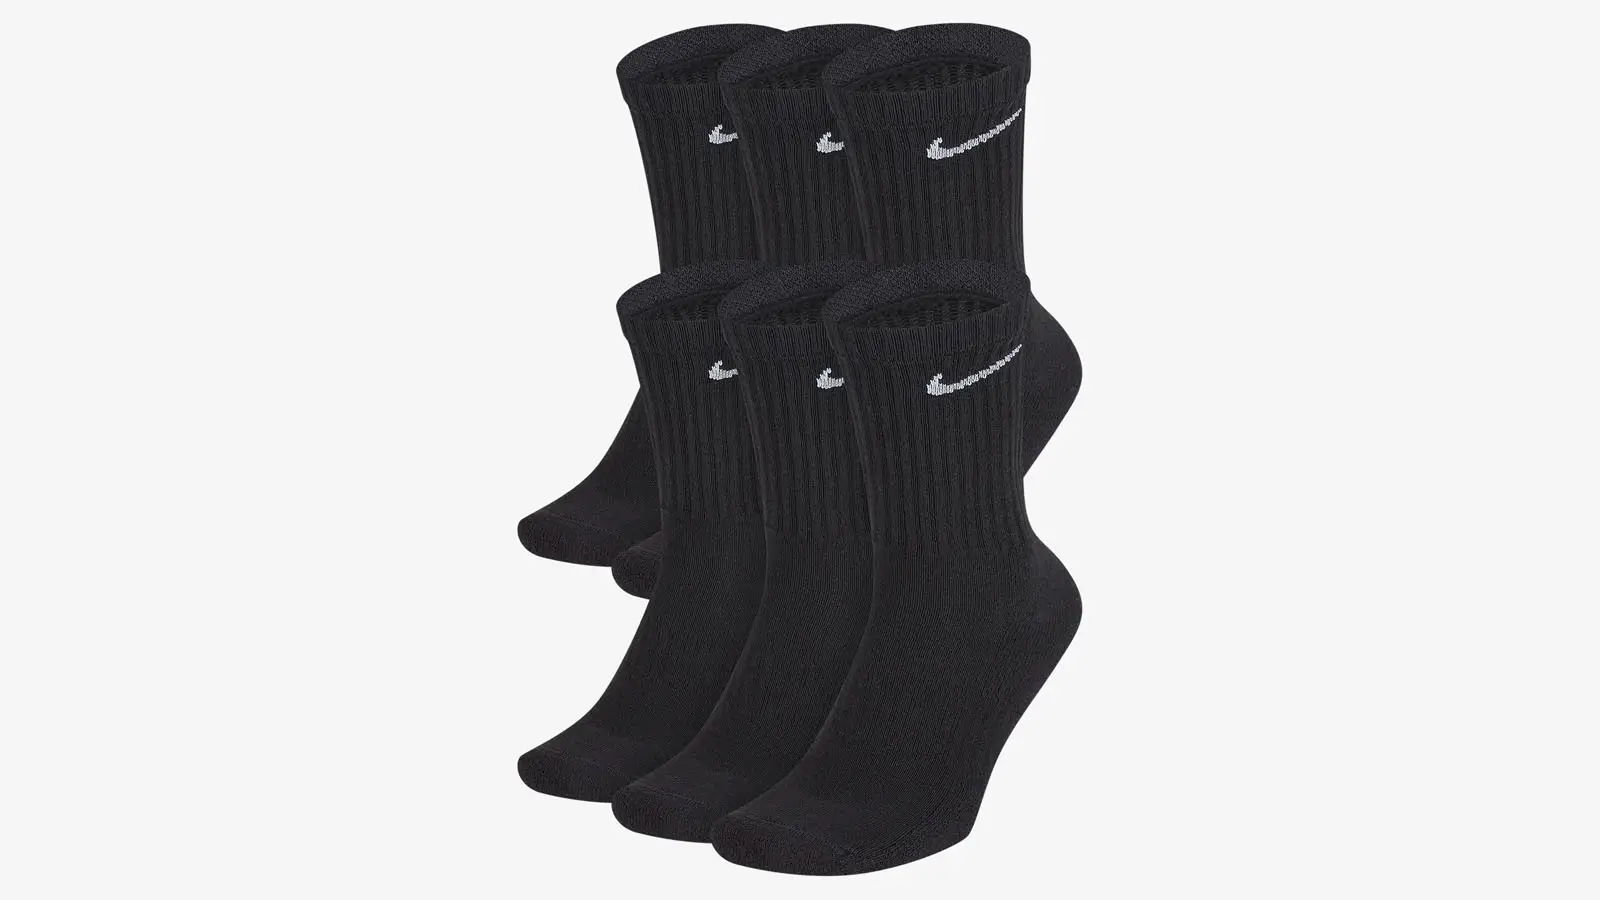 12 Everyday Nike Socks To Wear With Your Fave Sneaks | The Sole Supplier